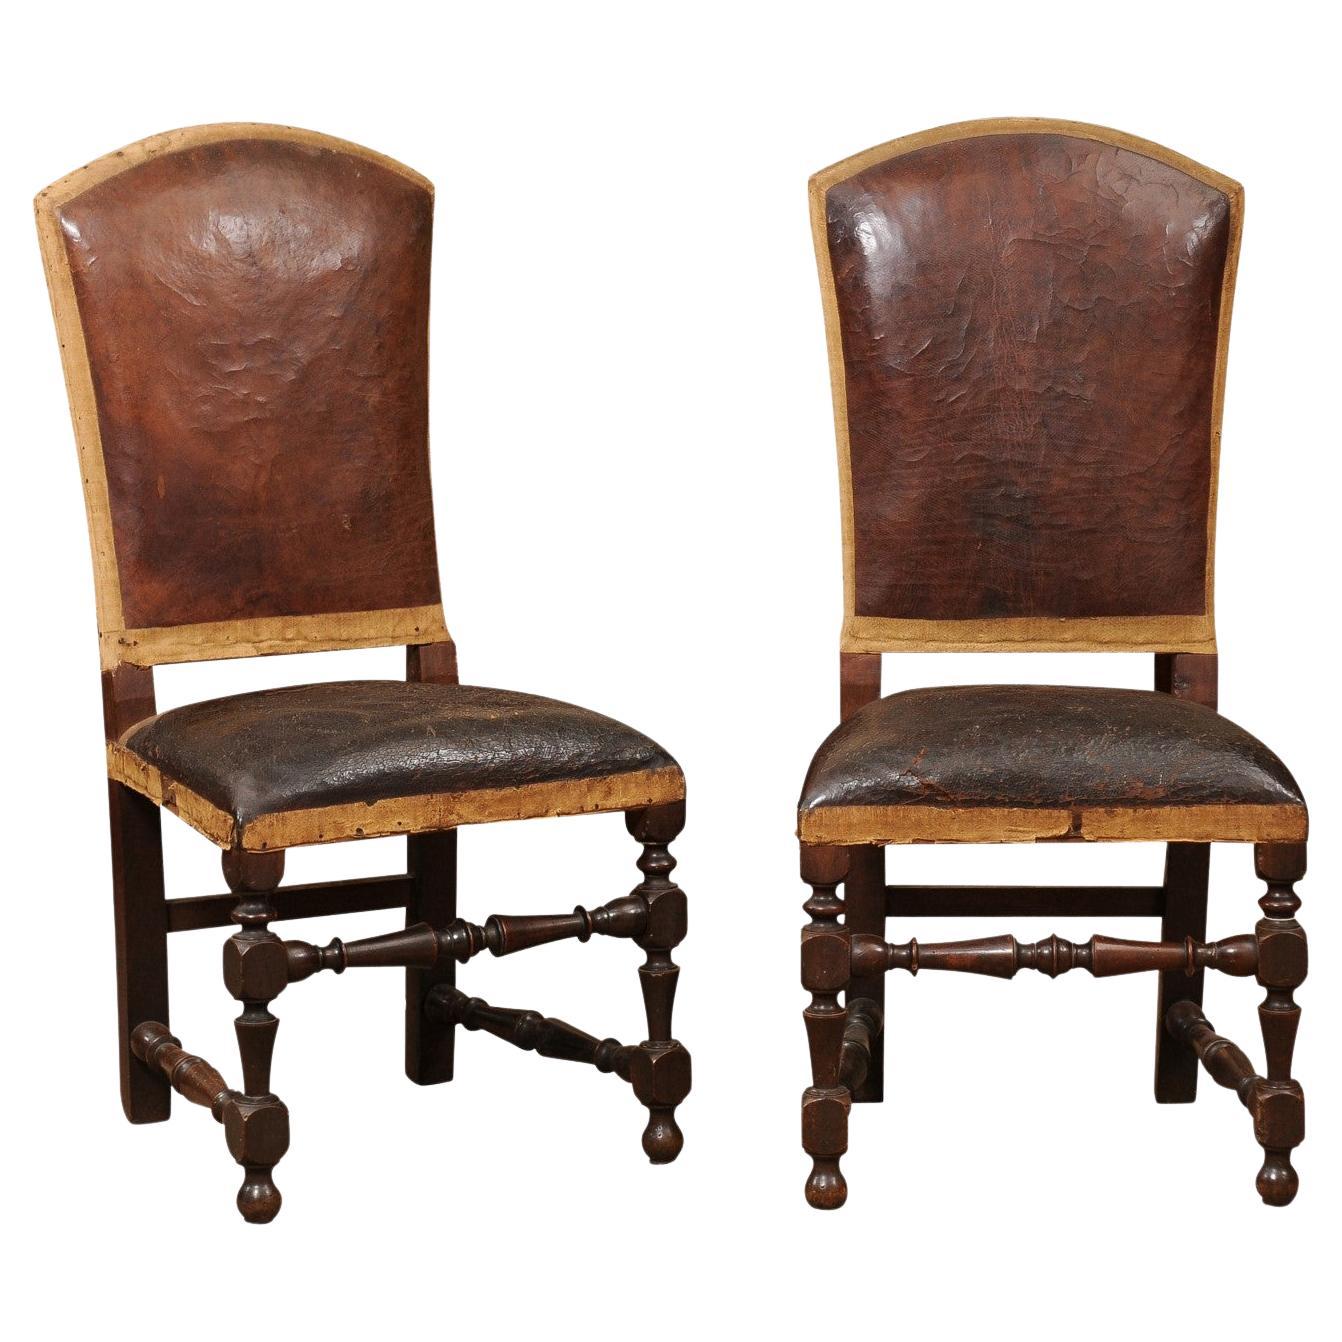 Pair of Large 18th Century Italian Walnut Hall Chairs with Leather Upholstery 